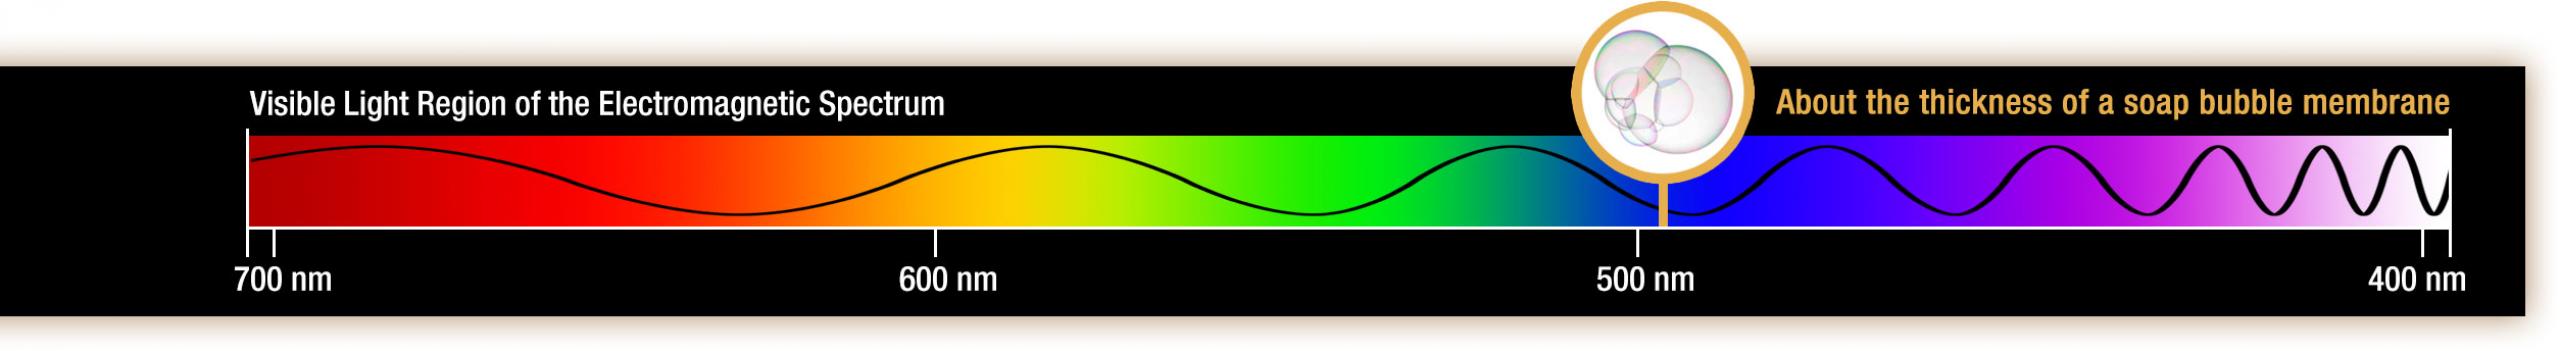 Diagram depicting the visible light spectrum showing the colors of the rainbow and their corresponding wavelenth size